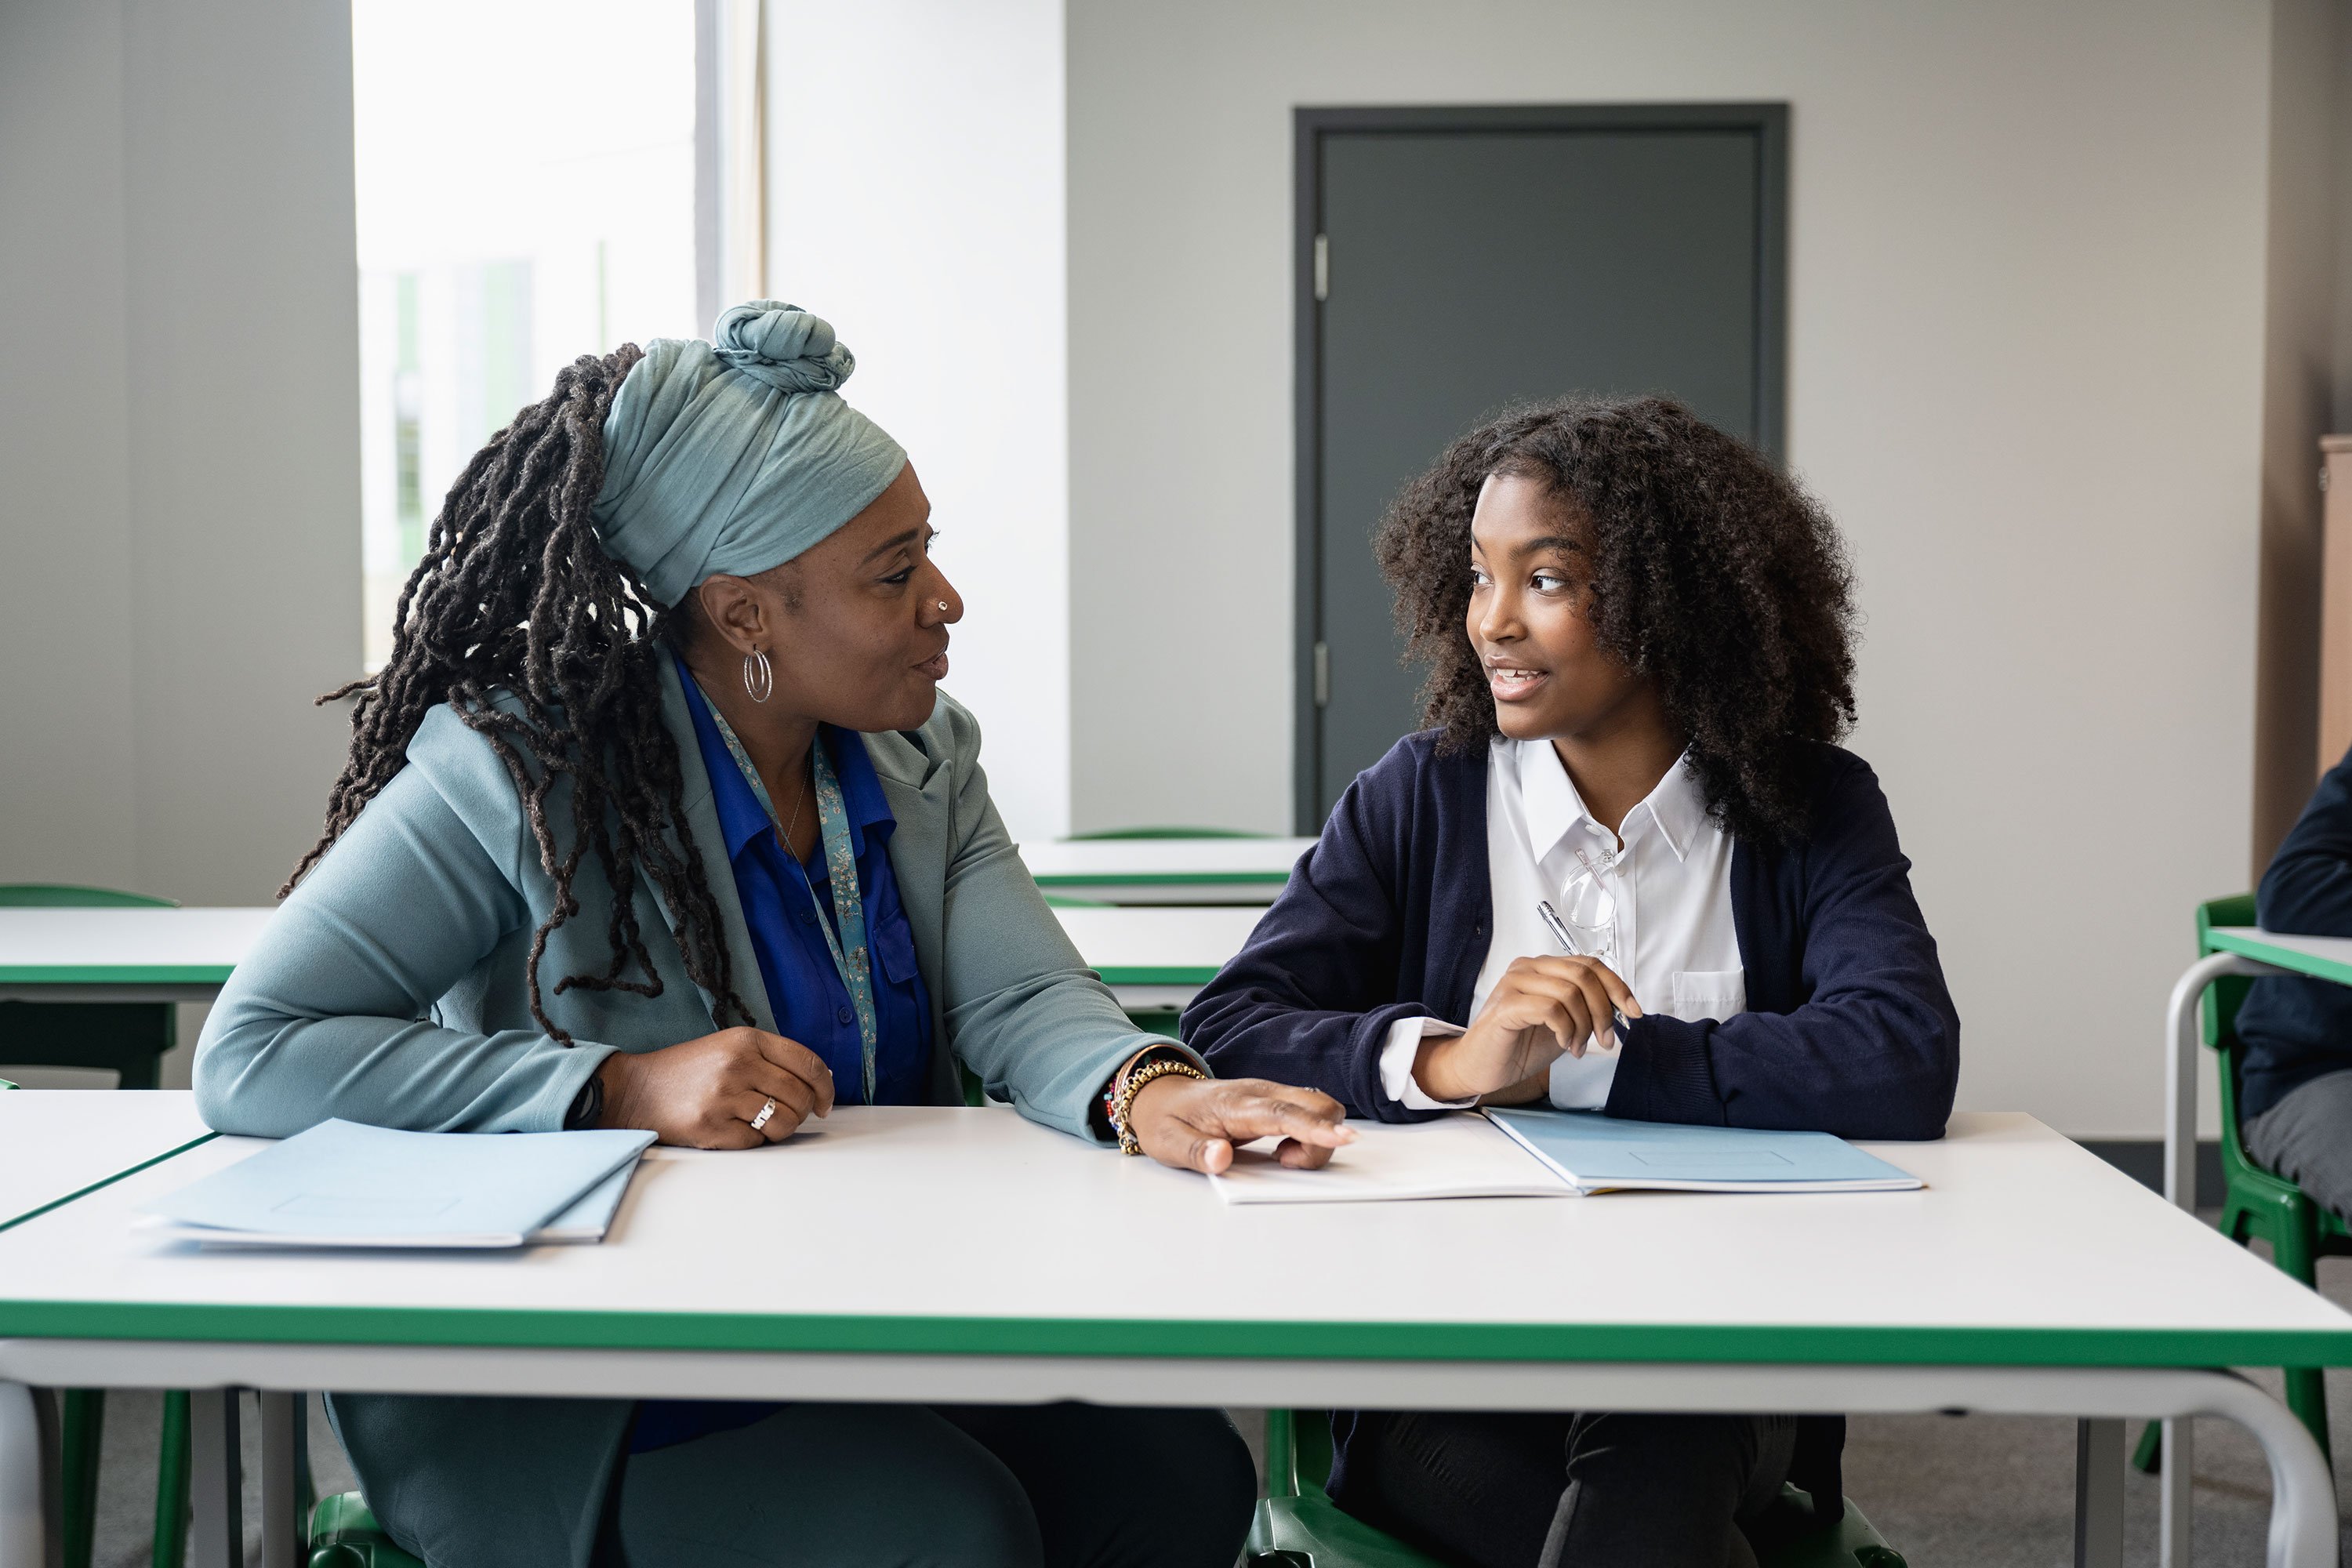 Teacher at a Department of Juvenile Justice Facility Talking to a Student at a Desk